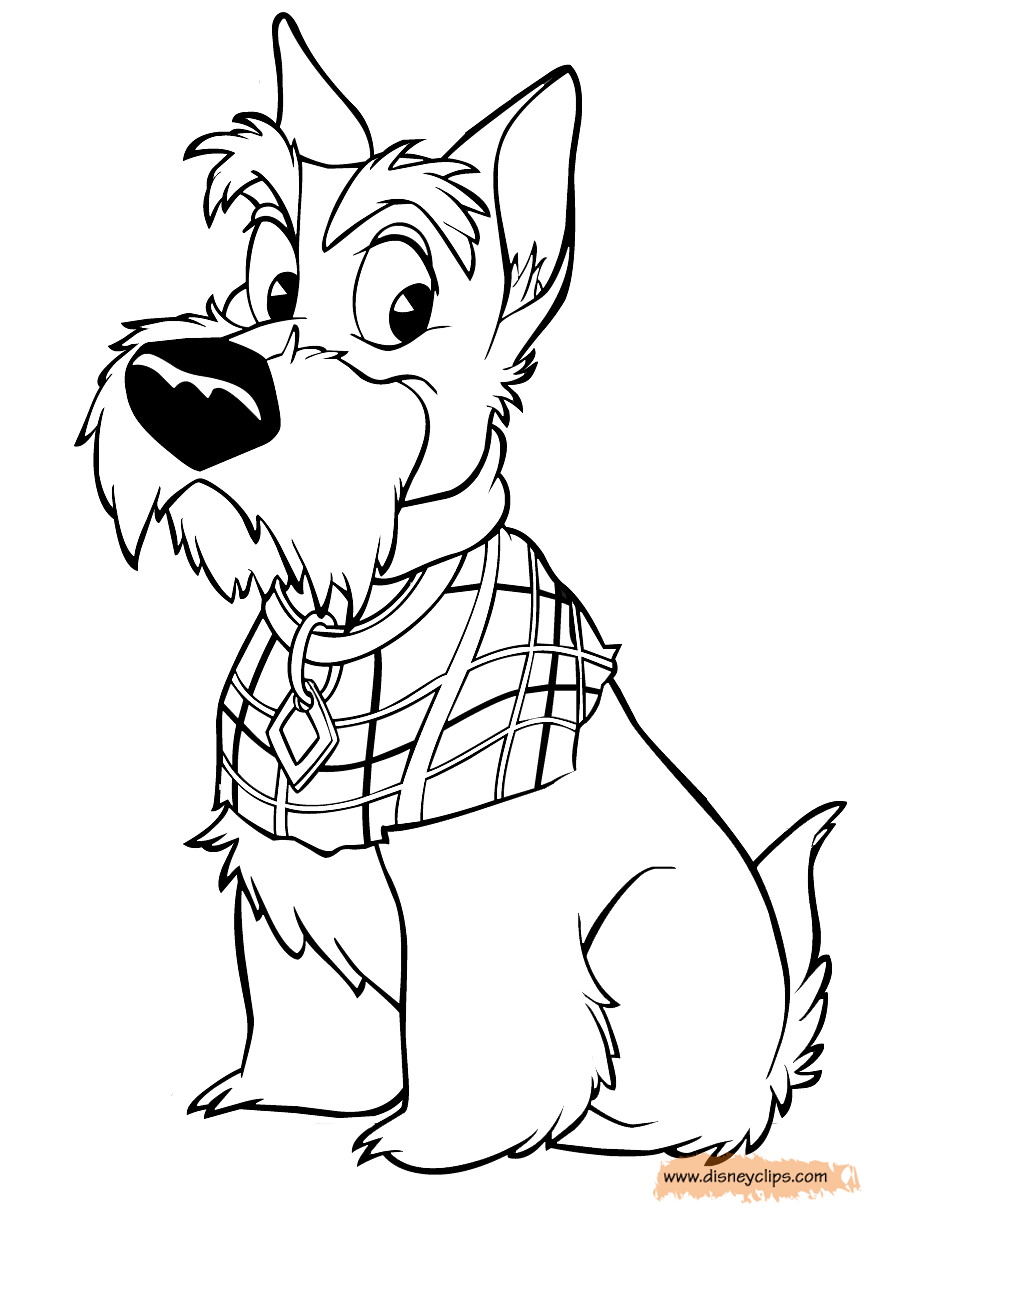 lady and the tramp coloring page lady and the tramp coloring pages coloring pages for tramp coloring page and lady the 